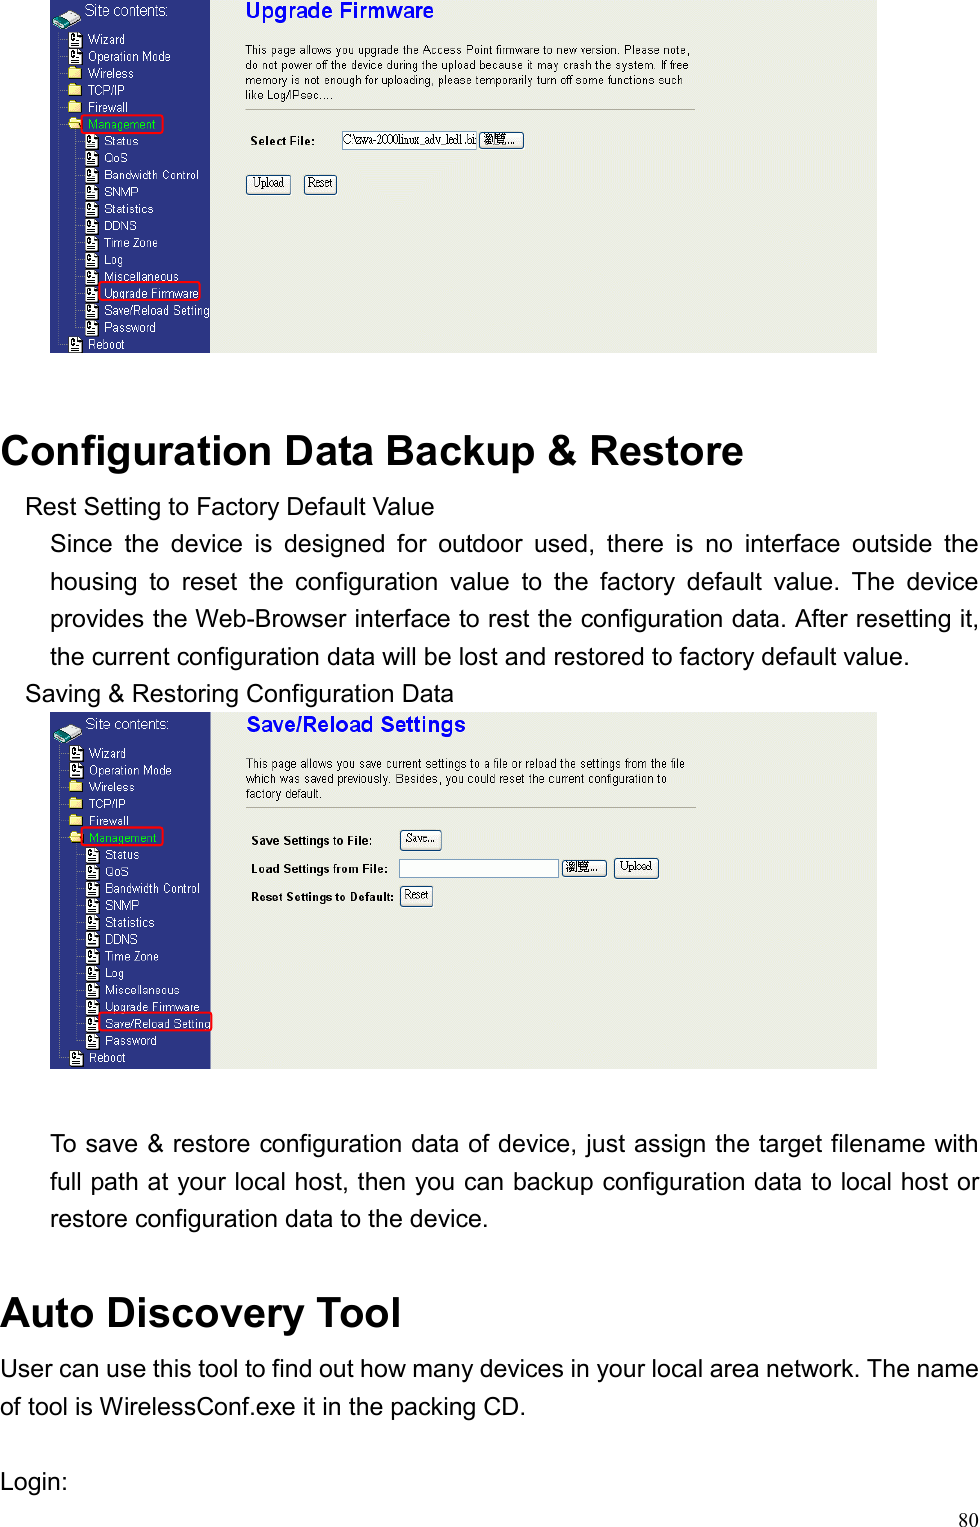  80  Configuration Data Backup &amp; Restore Rest Setting to Factory Default Value Since the device is designed for outdoor used, there is no interface outside the housing to reset the configuration value to the factory default value. The device provides the Web-Browser interface to rest the configuration data. After resetting it, the current configuration data will be lost and restored to factory default value. Saving &amp; Restoring Configuration Data   To save &amp; restore configuration data of device, just assign the target filename with full path at your local host, then you can backup configuration data to local host or restore configuration data to the device.  Auto Discovery Tool User can use this tool to find out how many devices in your local area network. The name of tool is WirelessConf.exe it in the packing CD.  Login: 